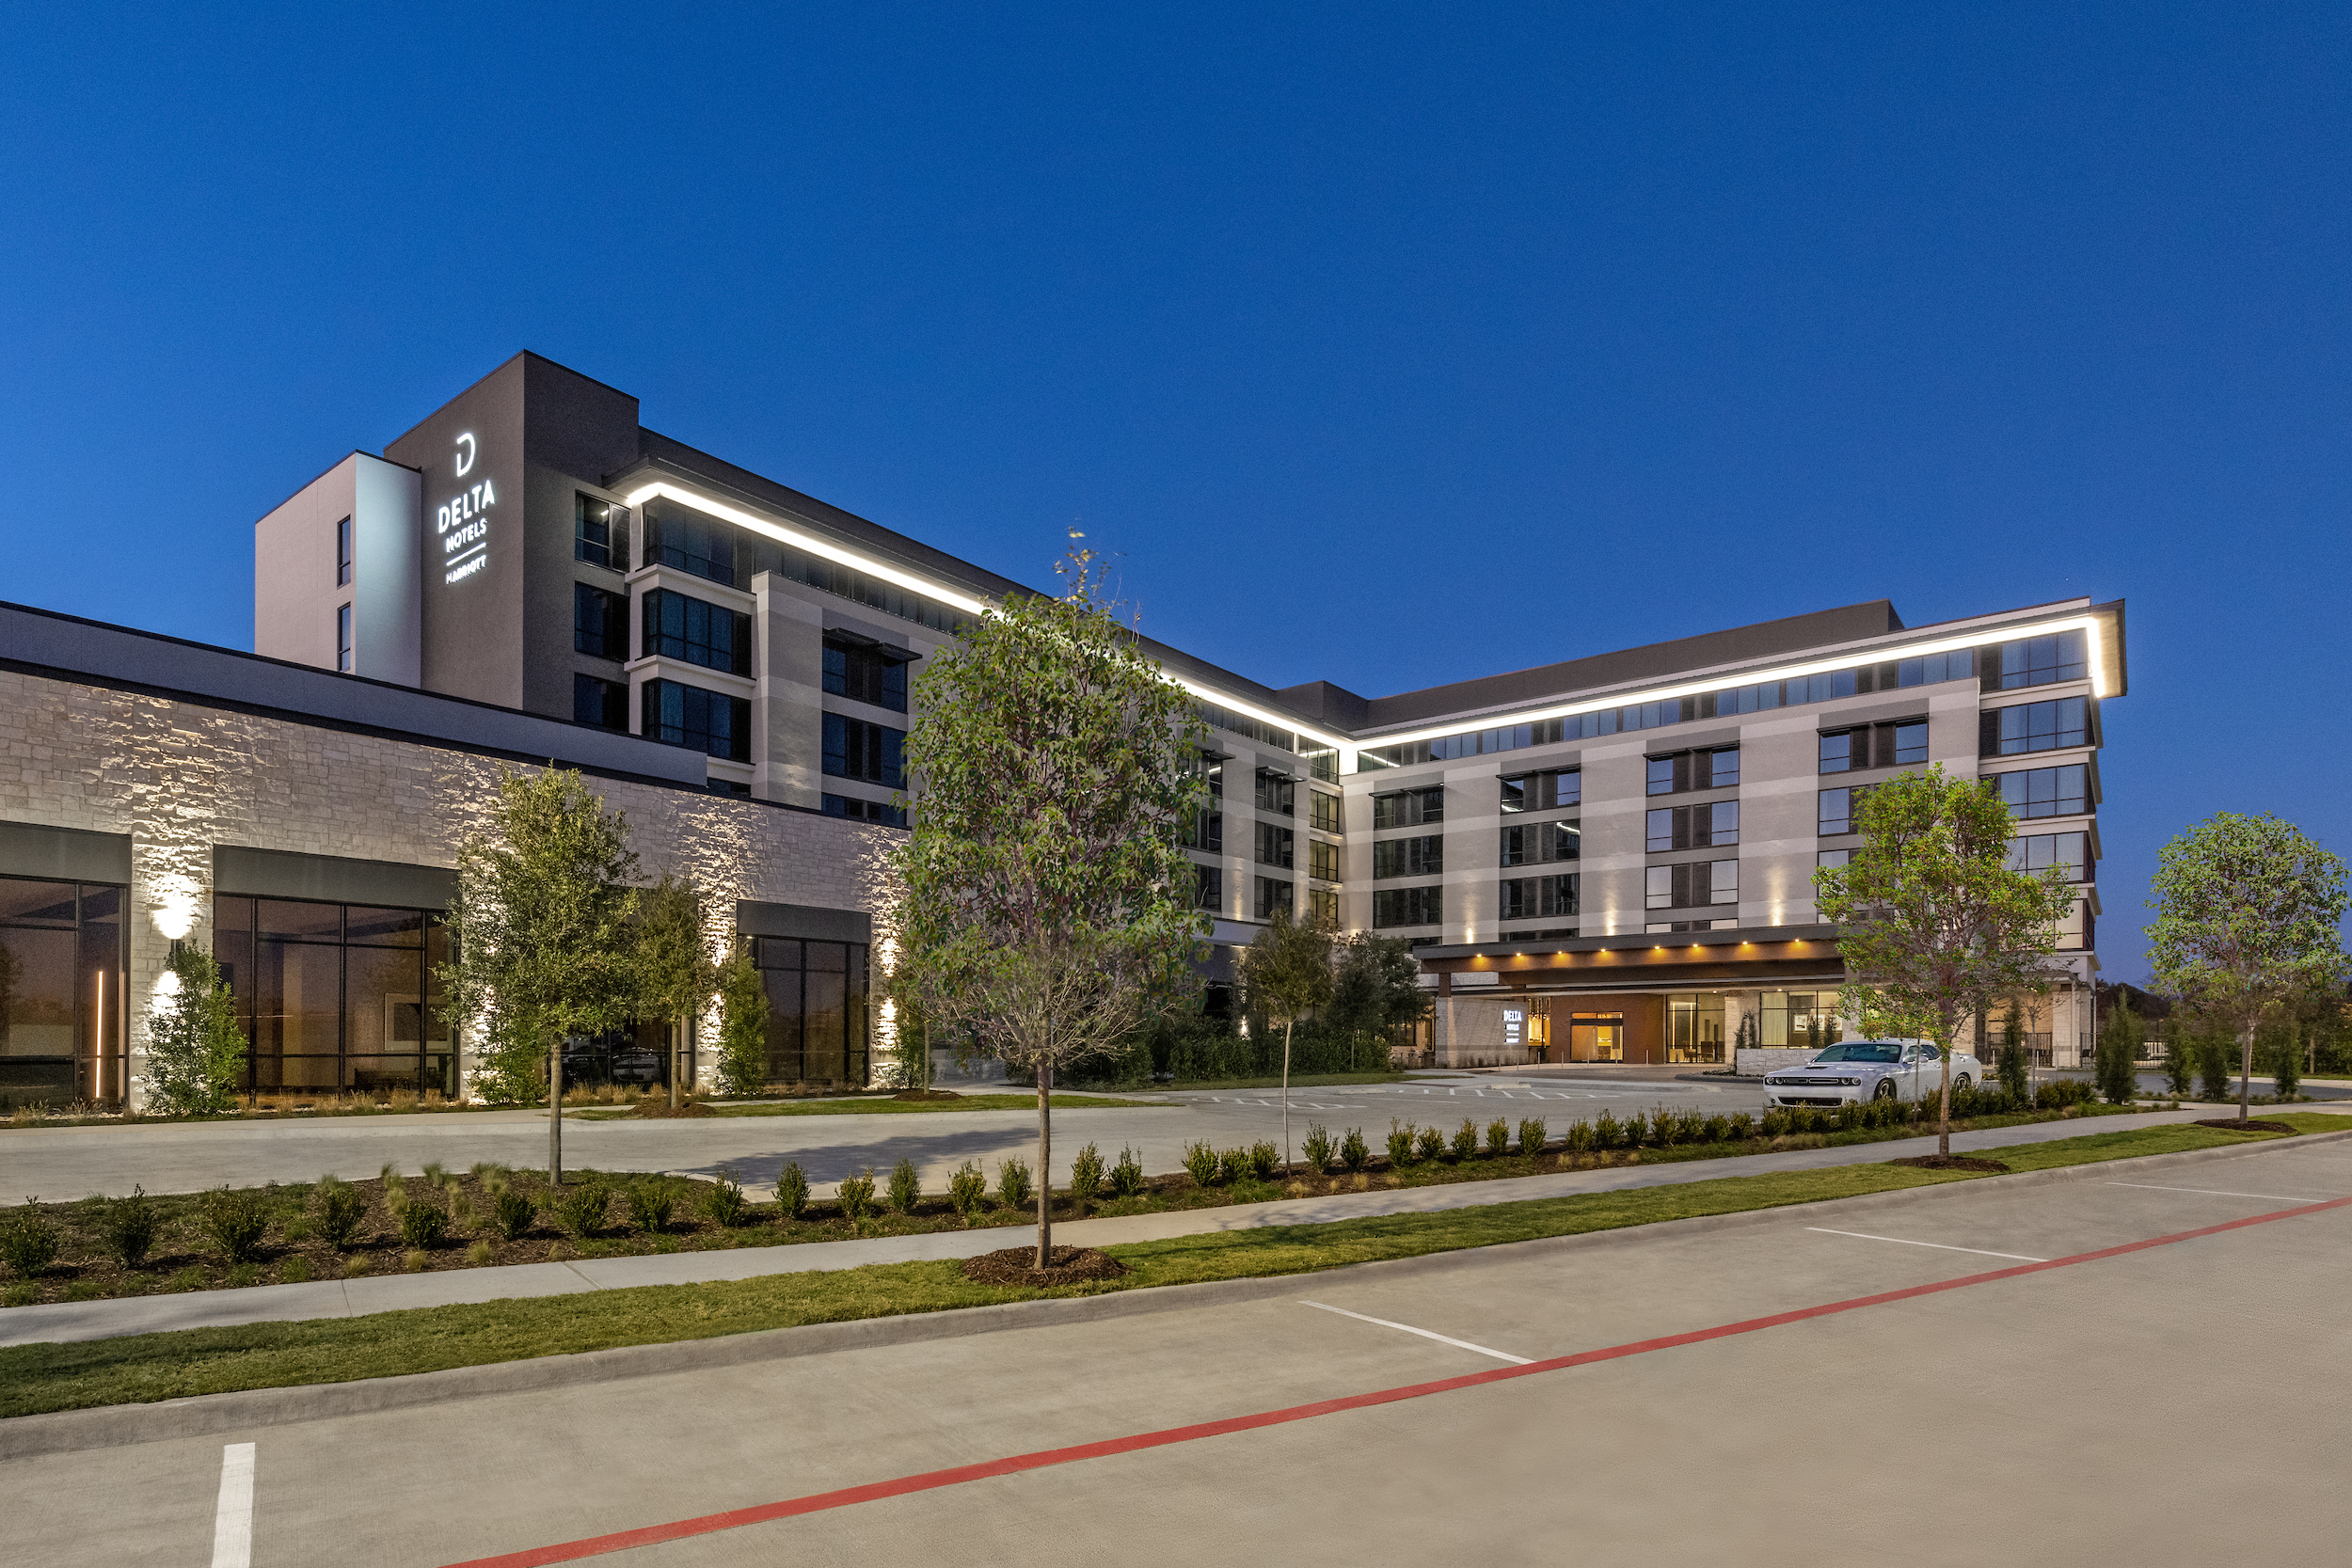 system-electric-delta-marriott-hospitality-south-lake-dfw-texas-2